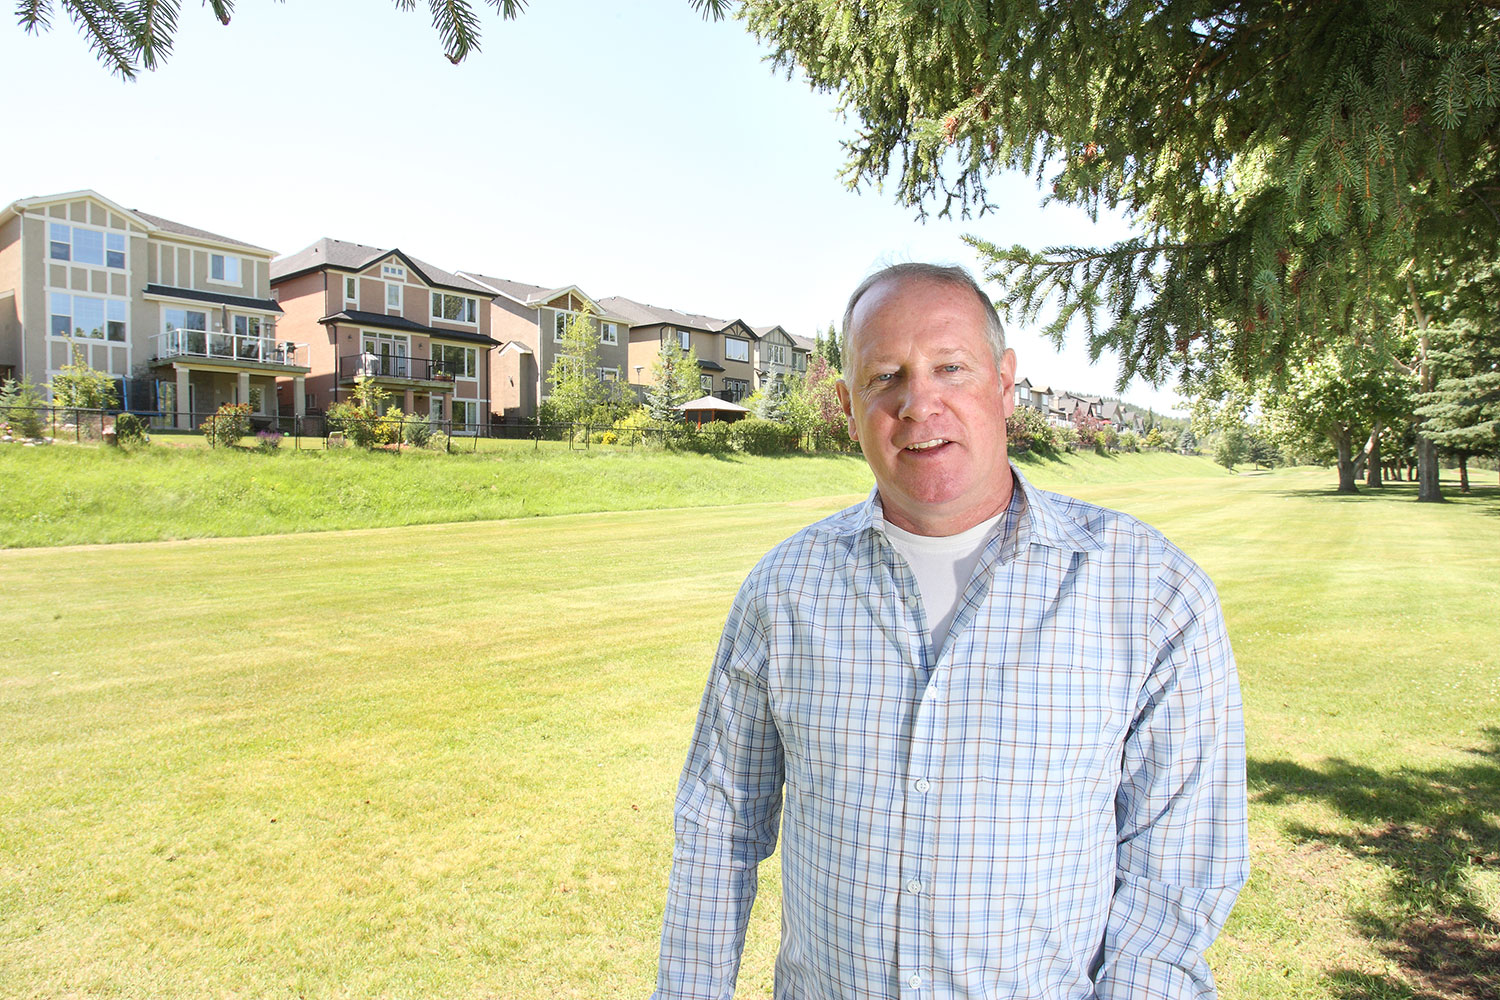 David Roberts was willing to pay a premium for a home bordering the Valley Ridge Golf Course for the wide-open green space and proximity to the game.
Wil Andruschak / For CREB®Now